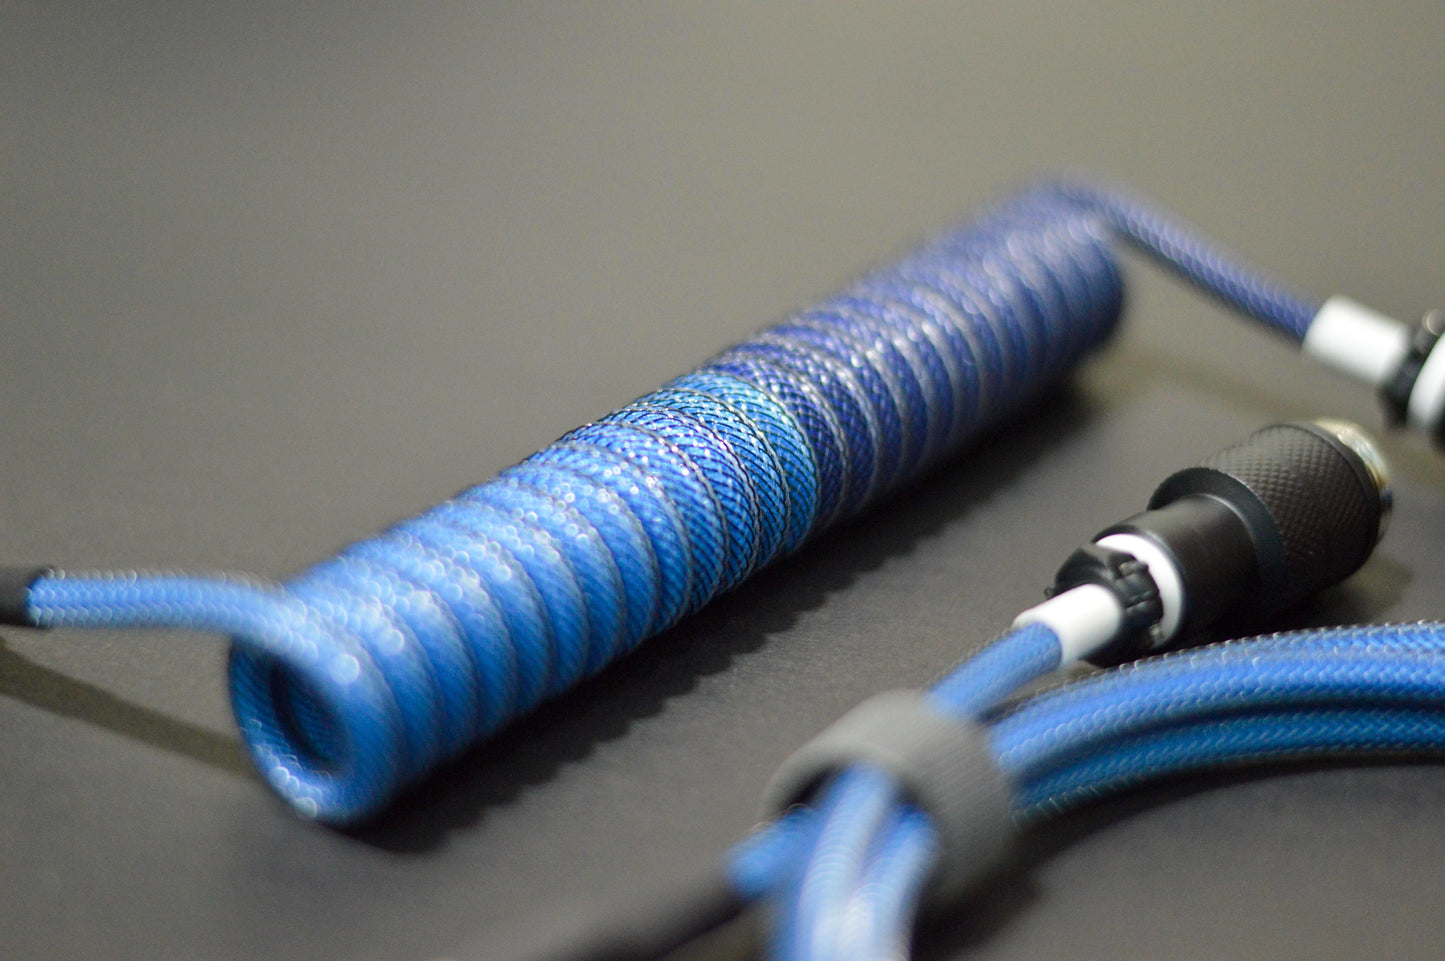 Blue x Carbon Dual Tone Coiled Cable